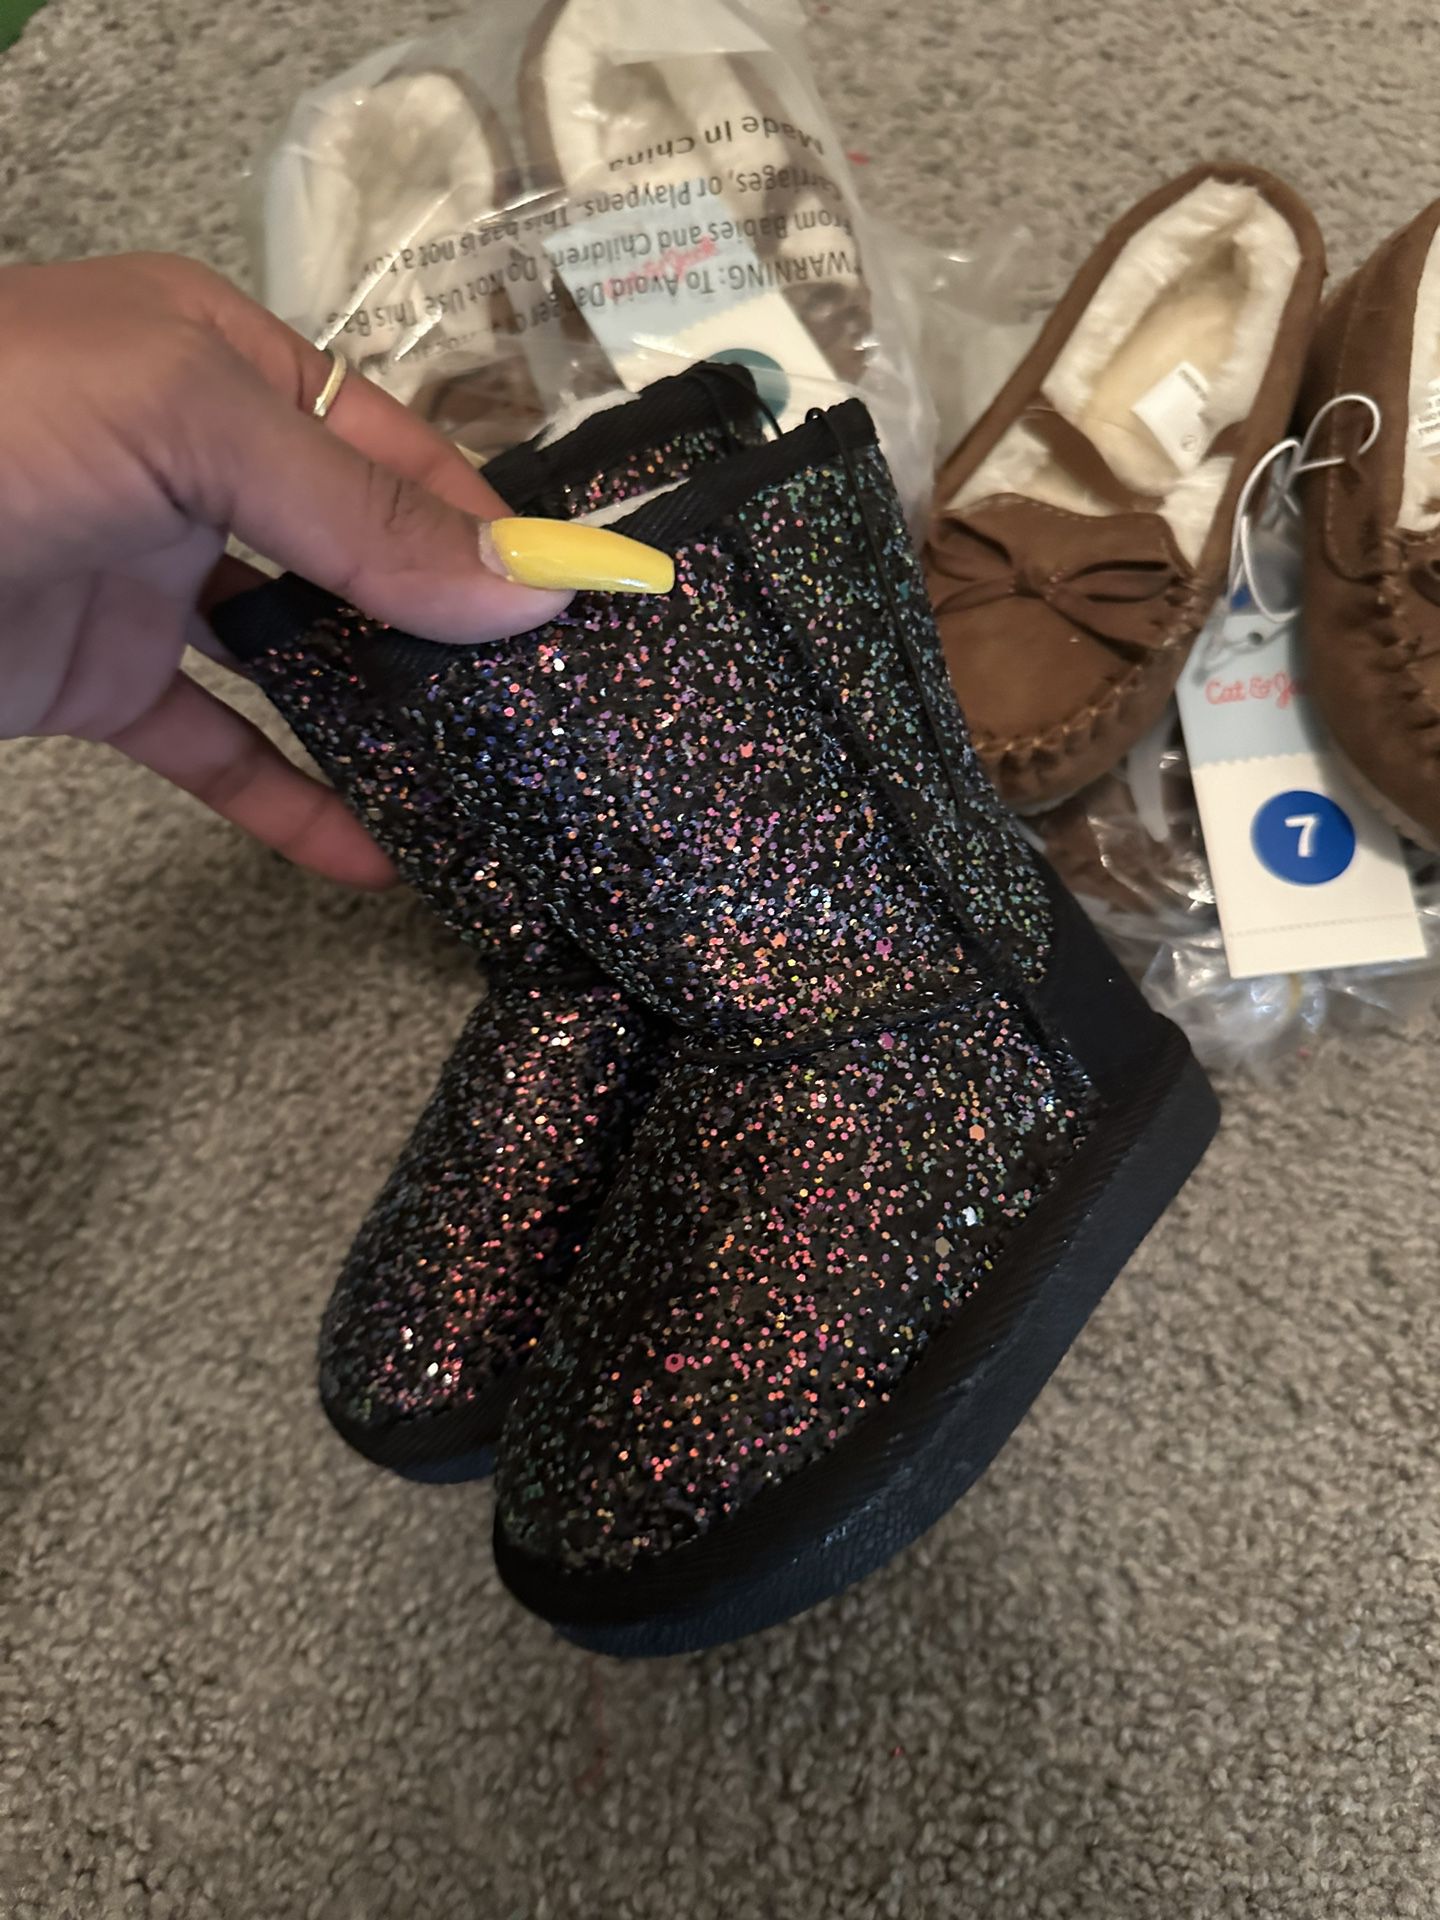 Brand New Baby Size 5 Gorgeous Boots $15. Retail $40